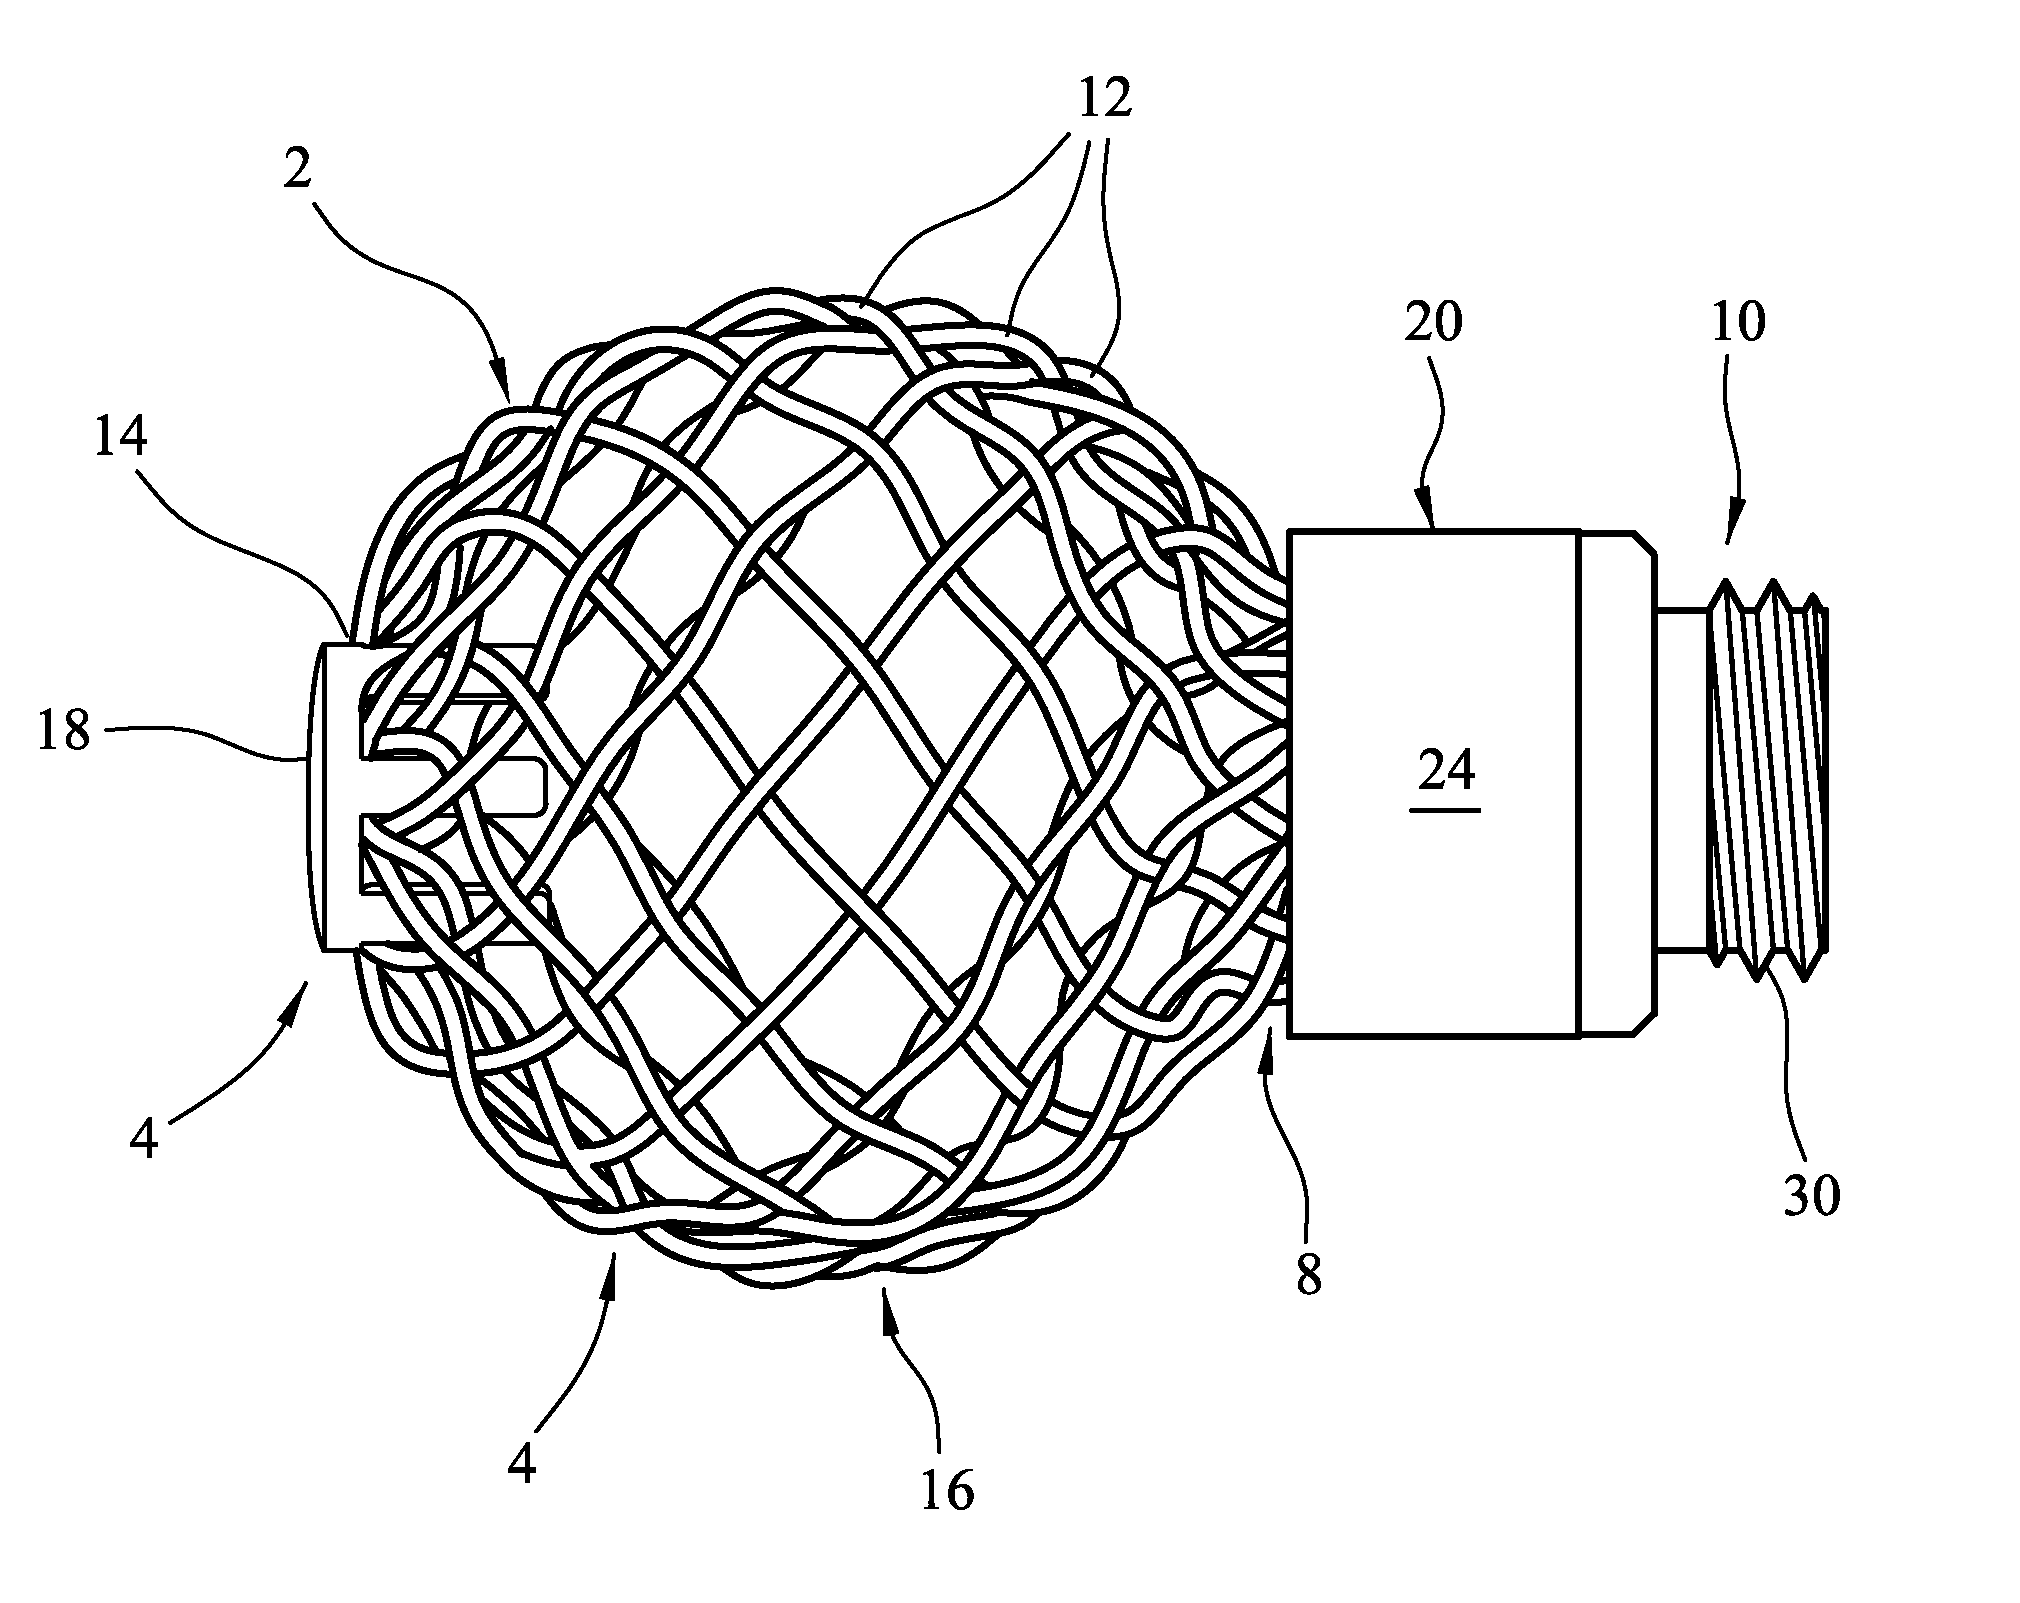 Support structure implant for a bone cavity